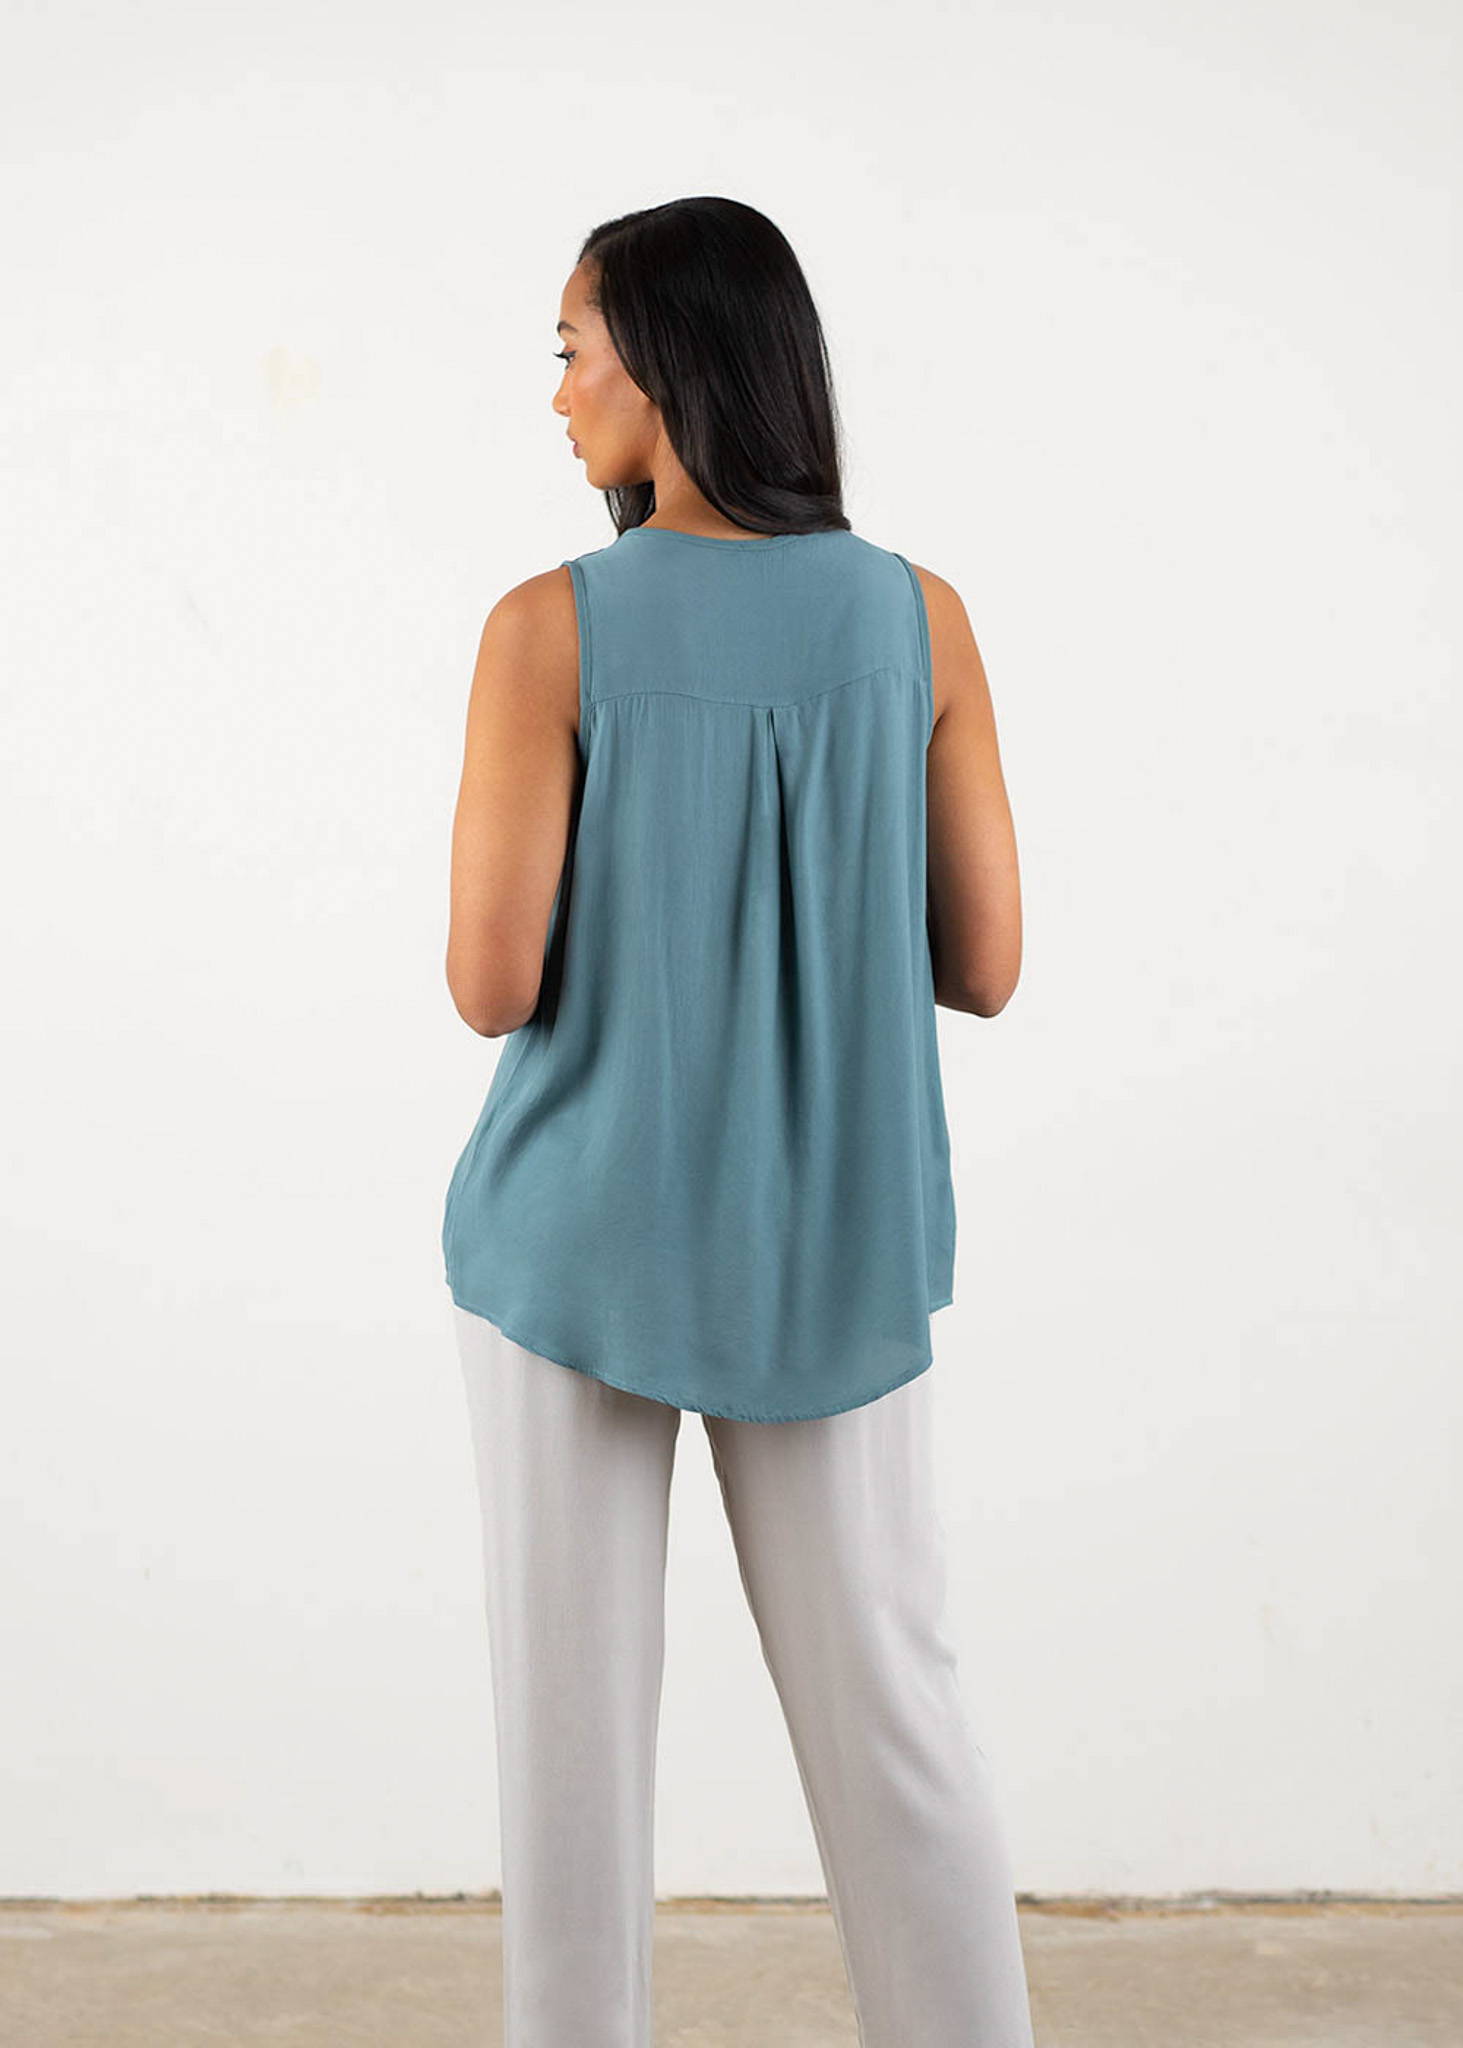 A model wearing a blue grey v-neck, sleeveless top over oatmeal drapey trouser and cream block heels